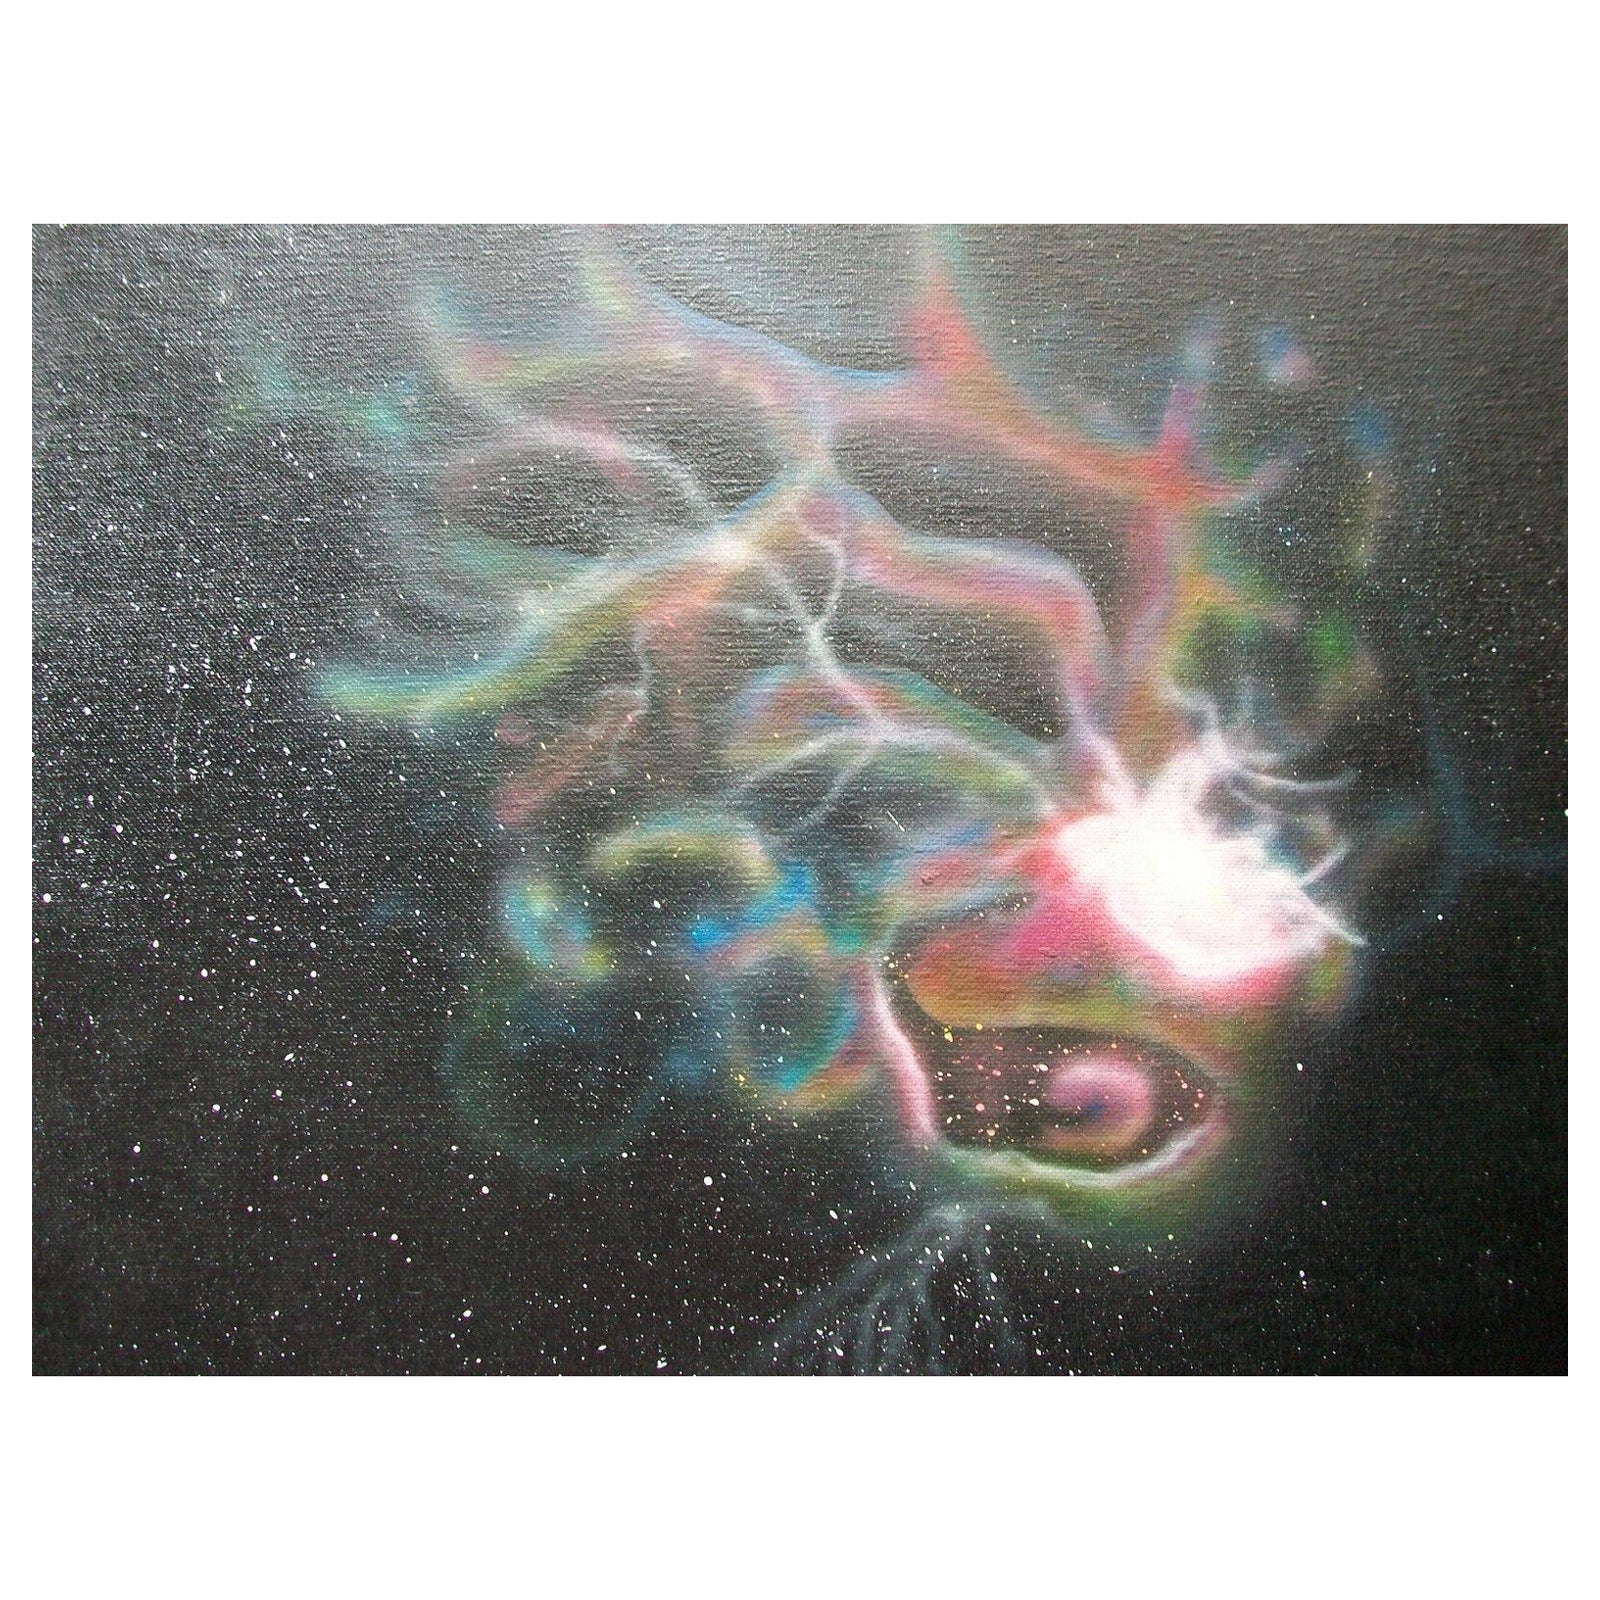 AURORA BOREALIS (Northern Lights) Vintage Oil Painting - Unsigned - Late 20th C. For Sale